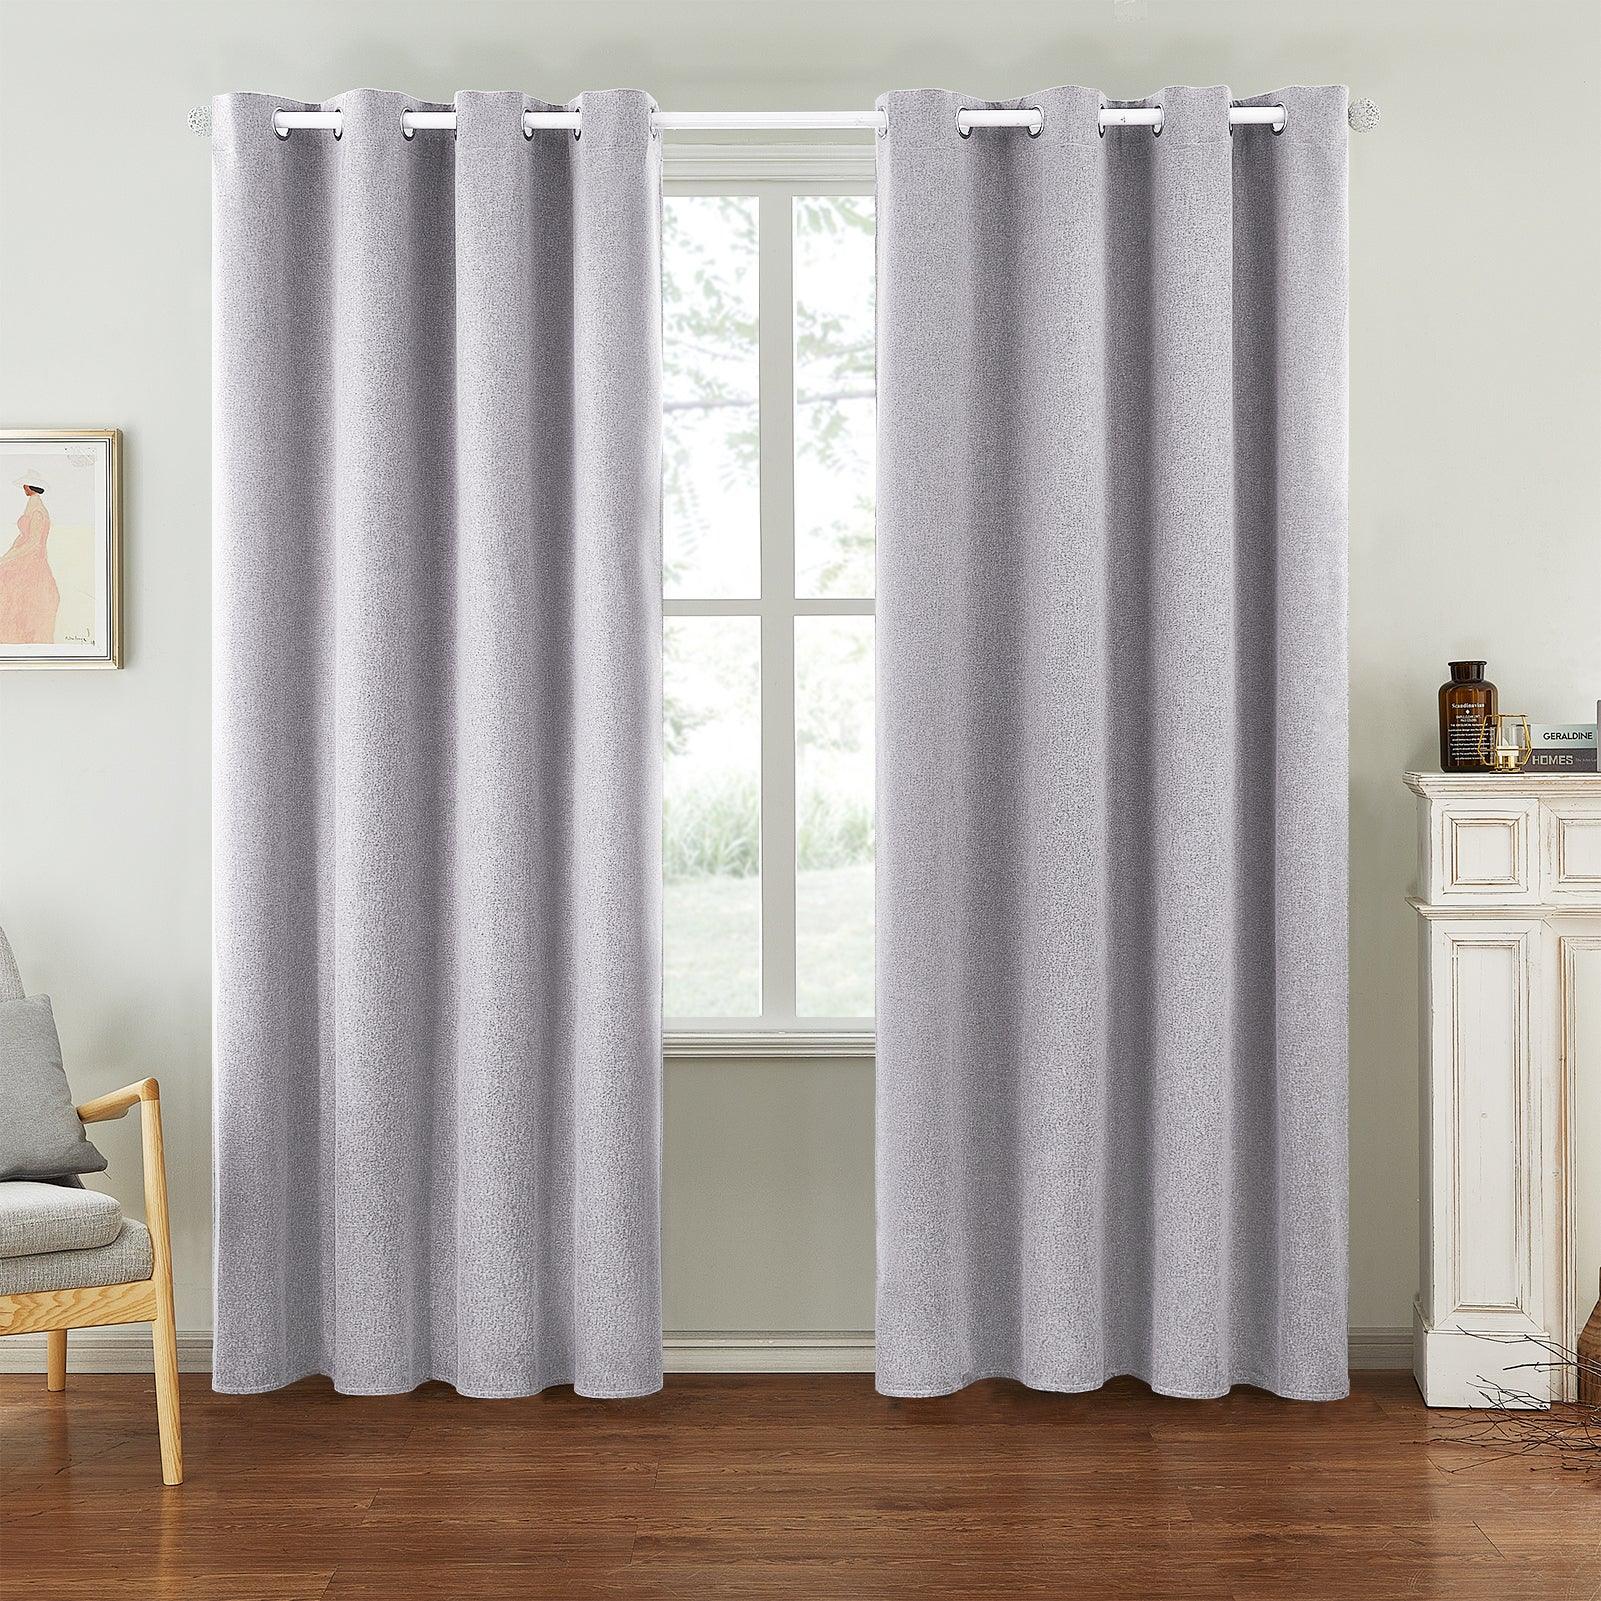 Custom Size -Modern Solid Thermal Insulated Window Treatment Blackout Drapes For Bedroom With Eyelets,1 Panel - Topfinel